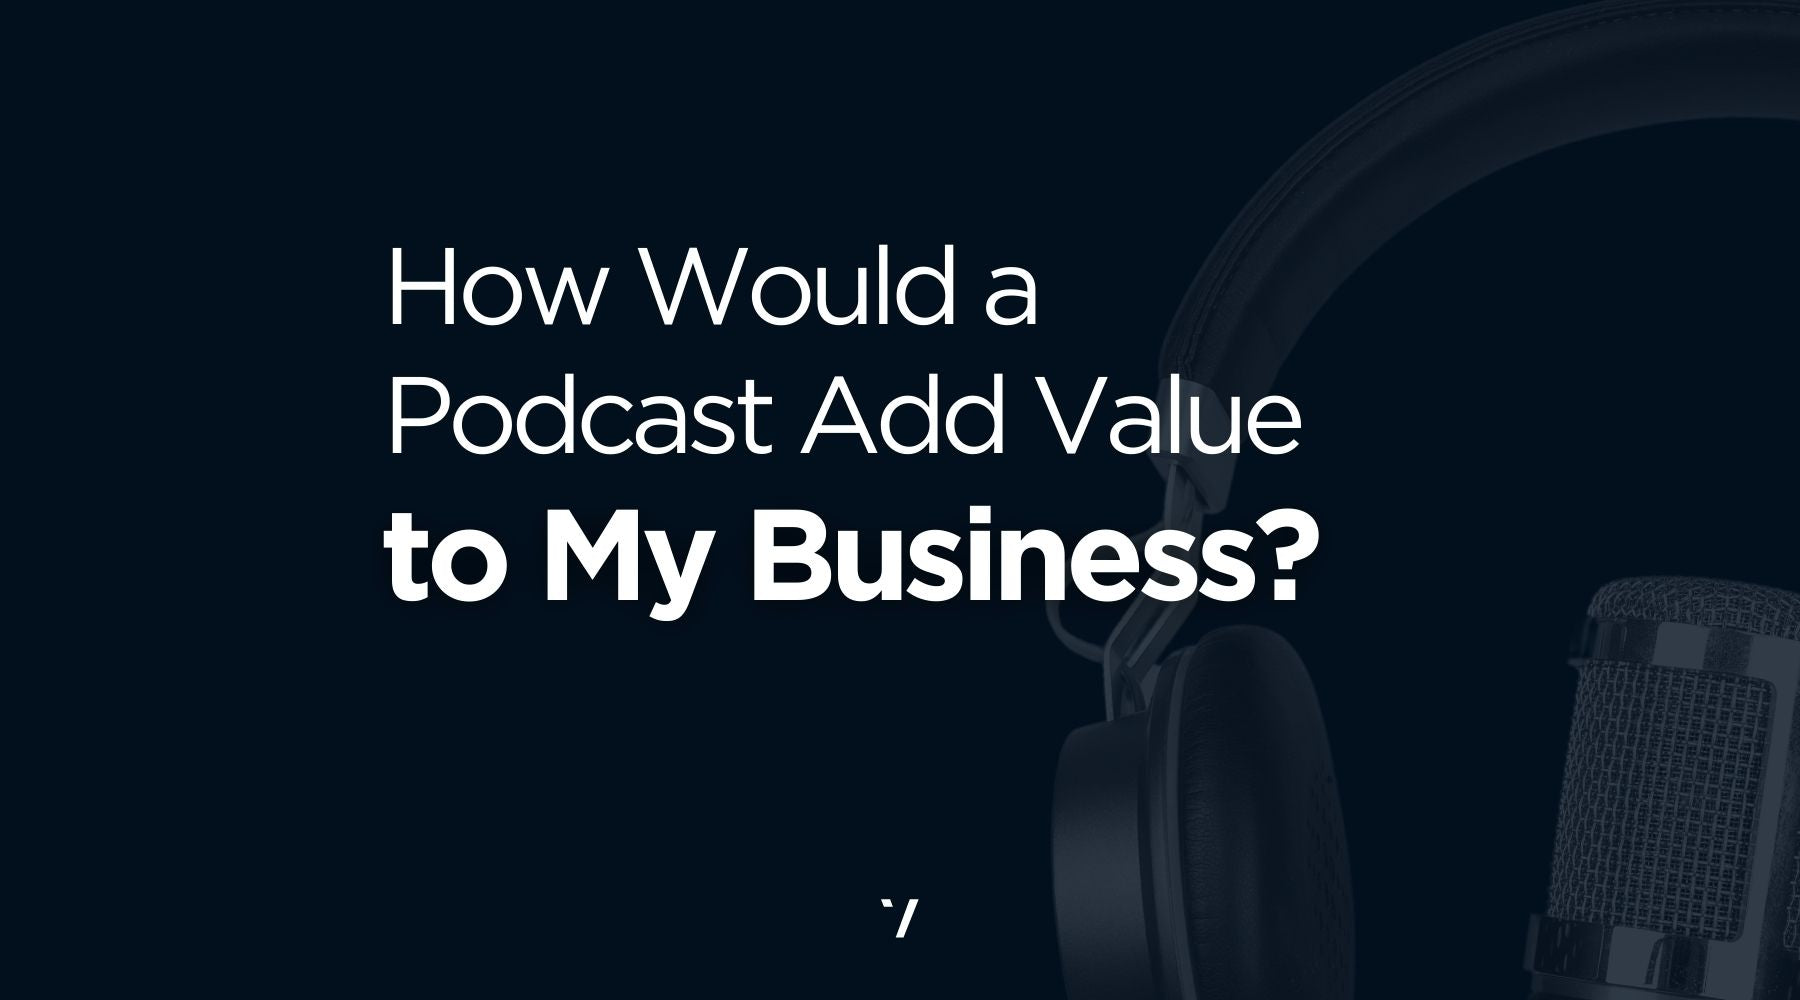 Would a Podcast Add Value to My Business?